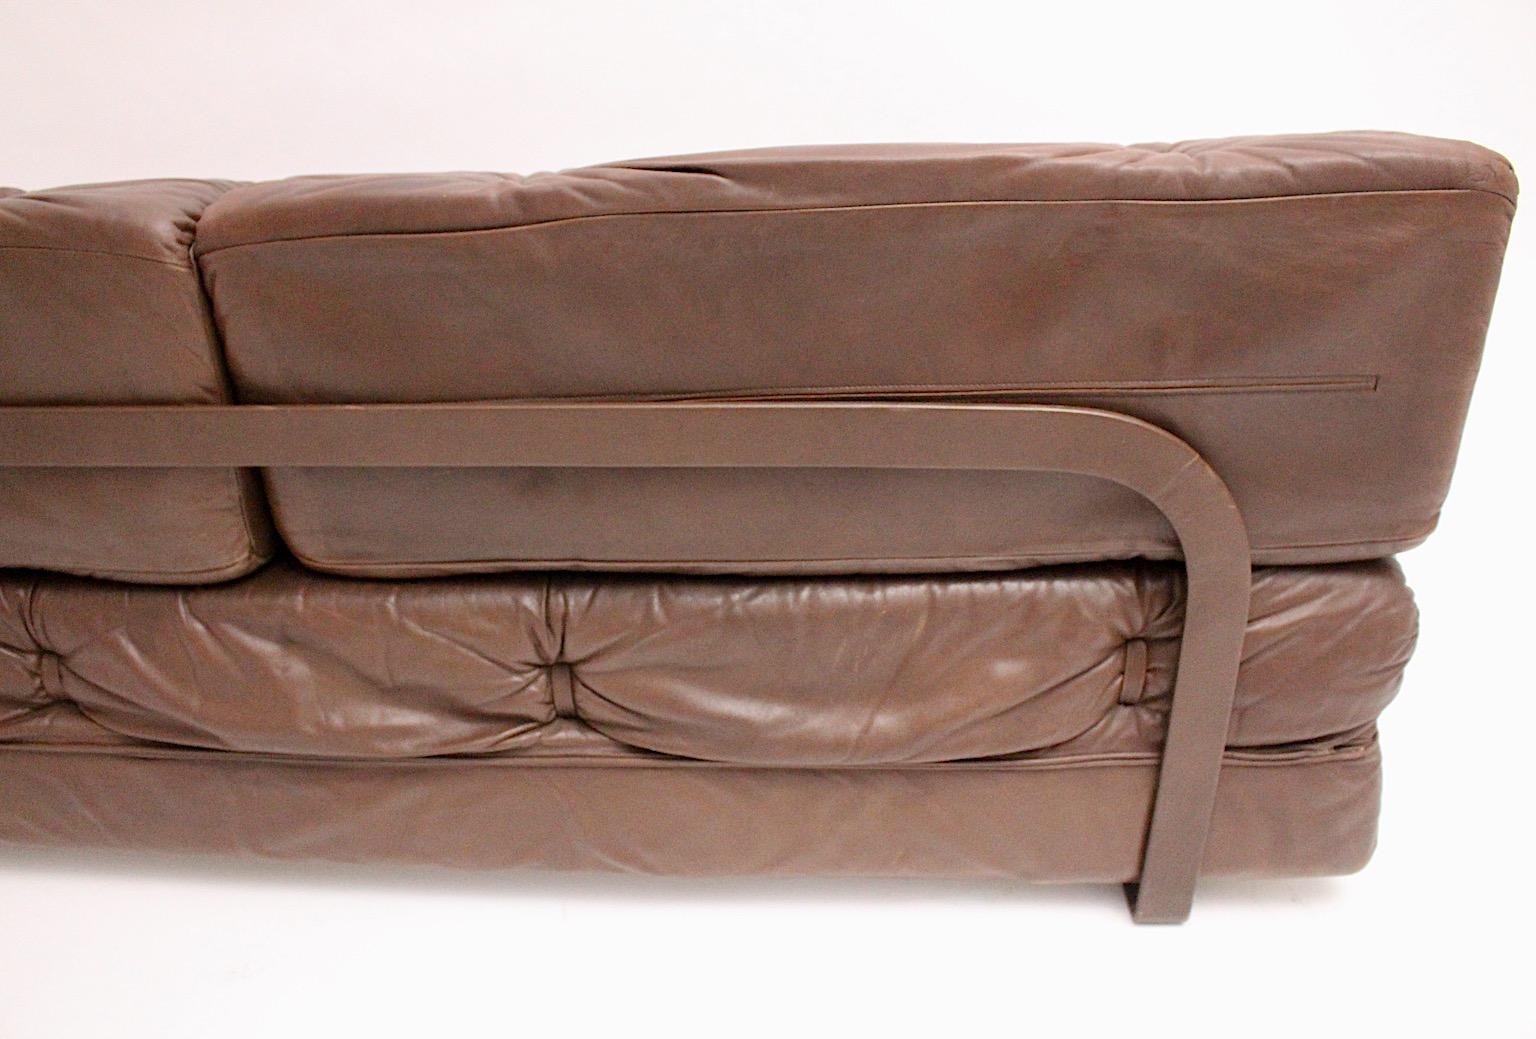 Wittmann Leather Brown Vintage Sofa or Daybed Atrium De Sede Style 1970s Austria For Sale 3